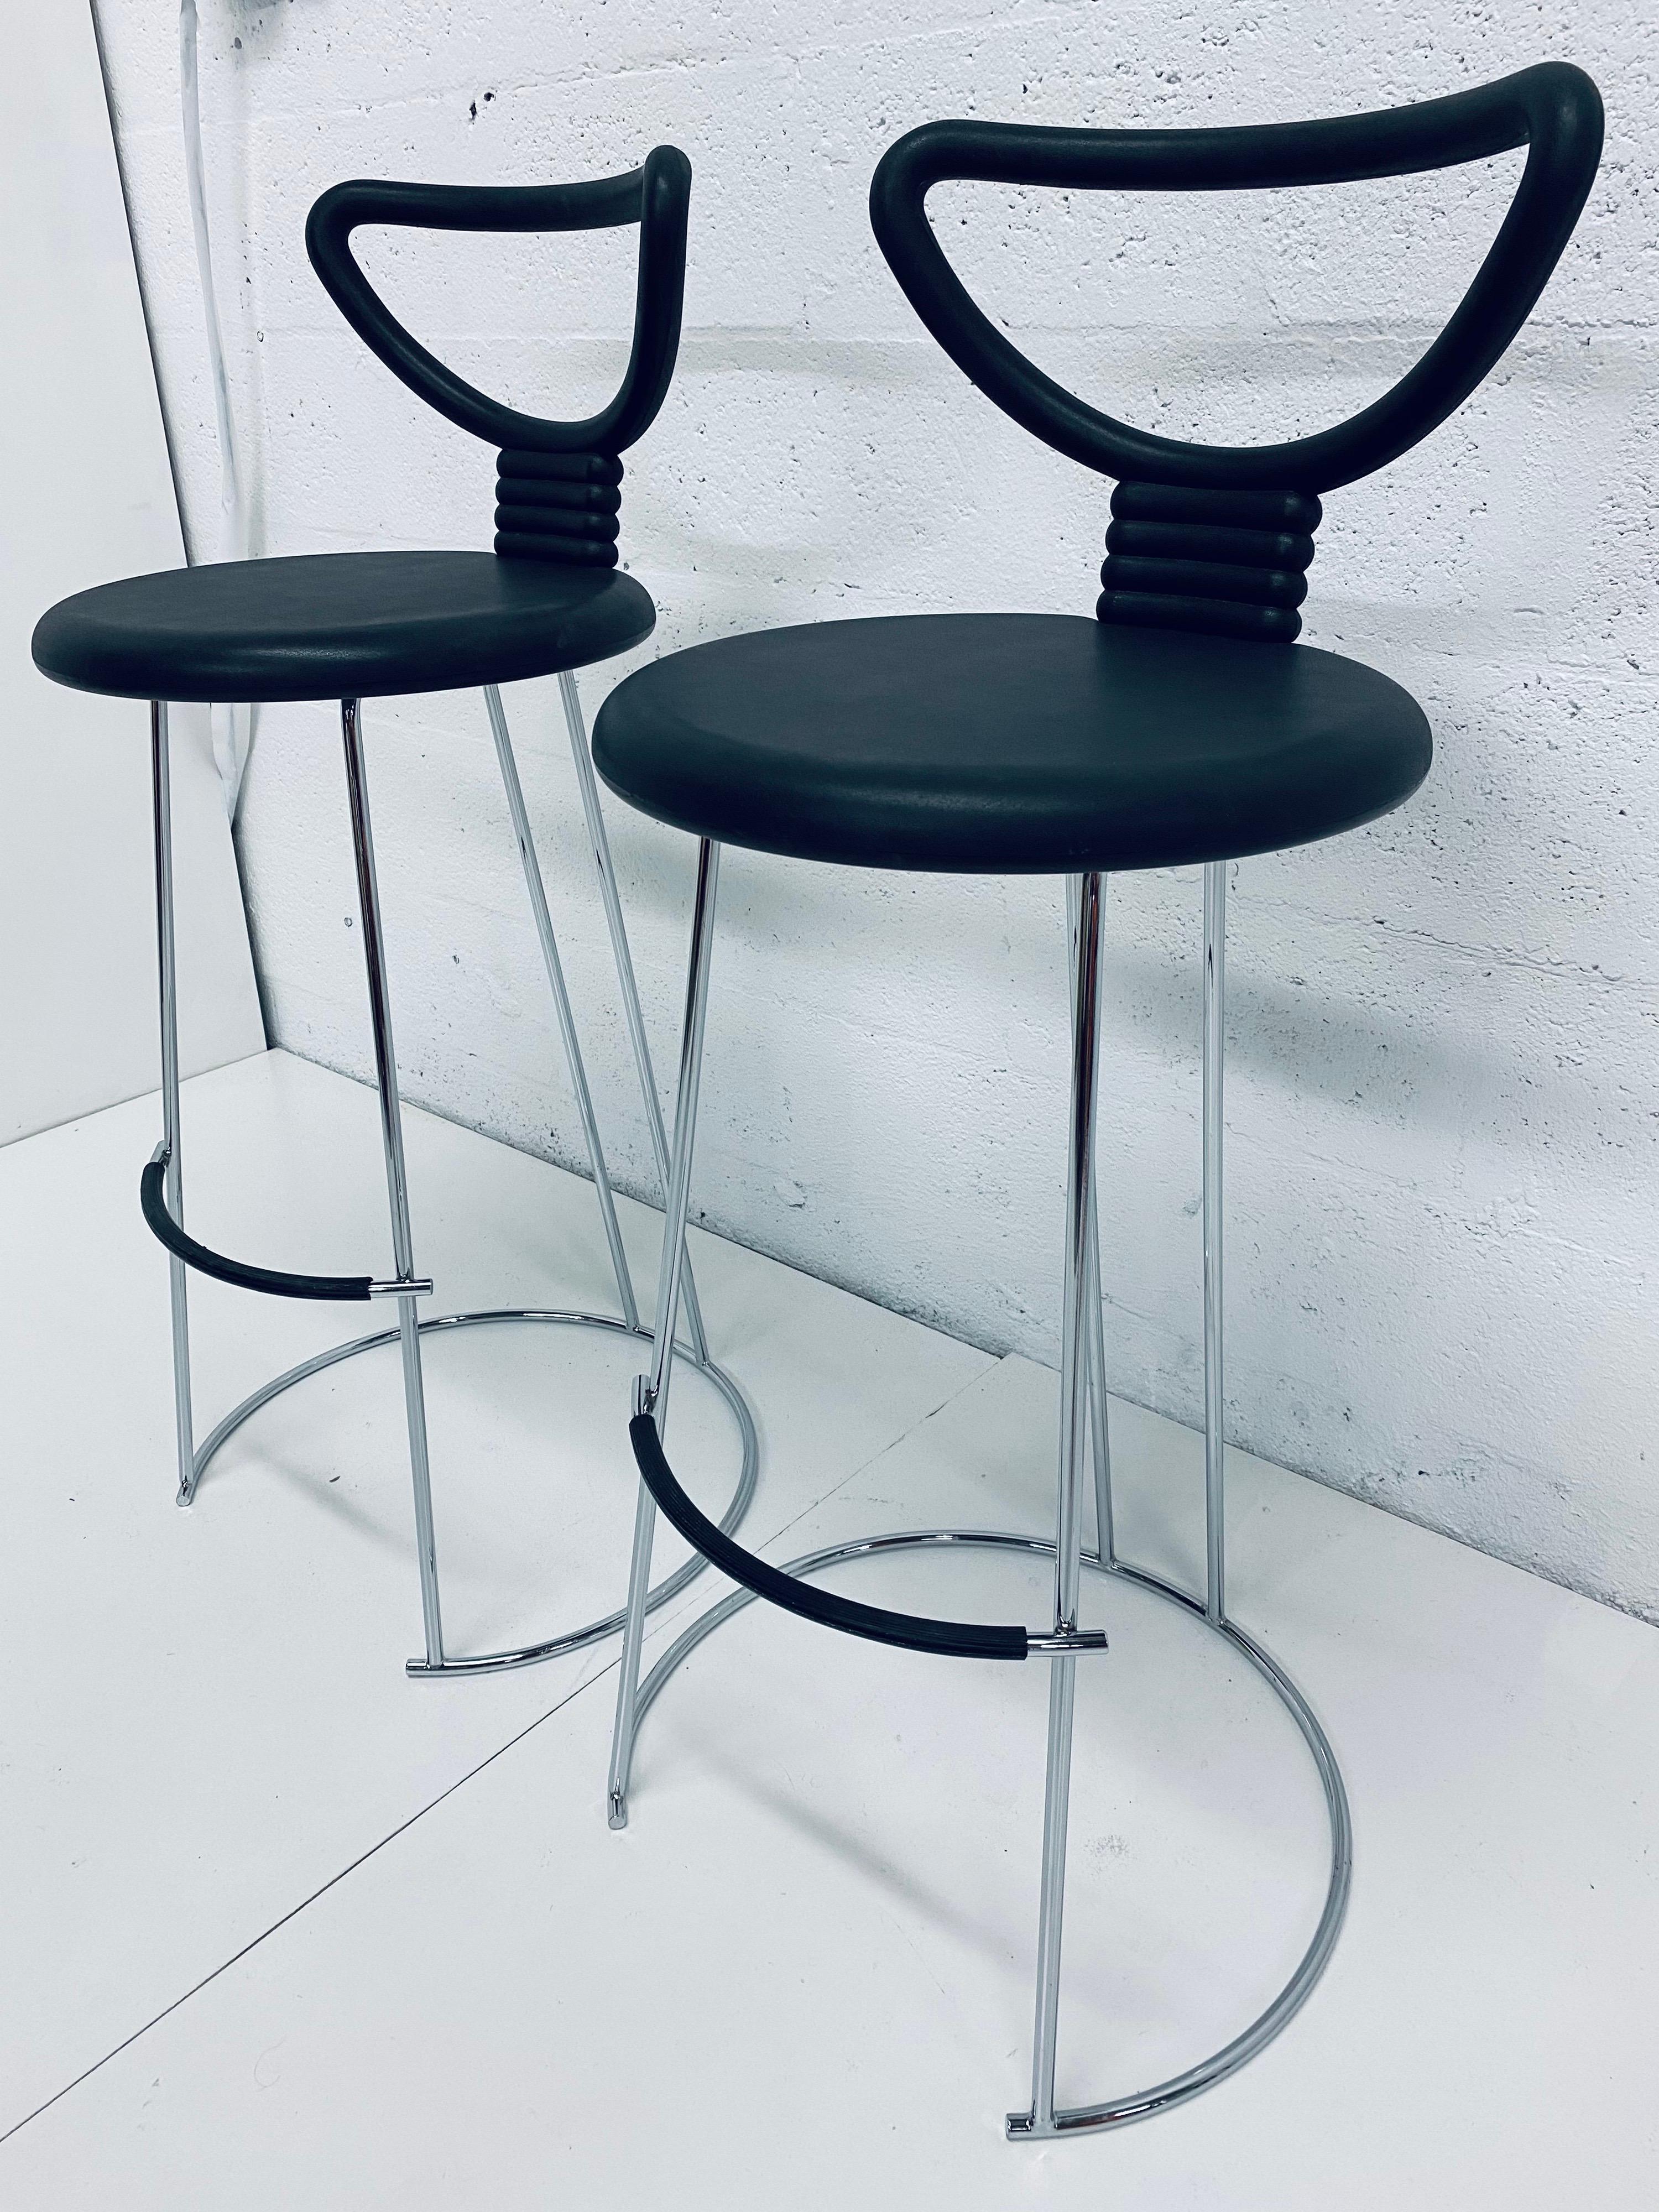 Pair of Nardis bar height stools with rubber like seats on a polished chrome frame designed by Nobu Tanigawa for Fasem Italy.